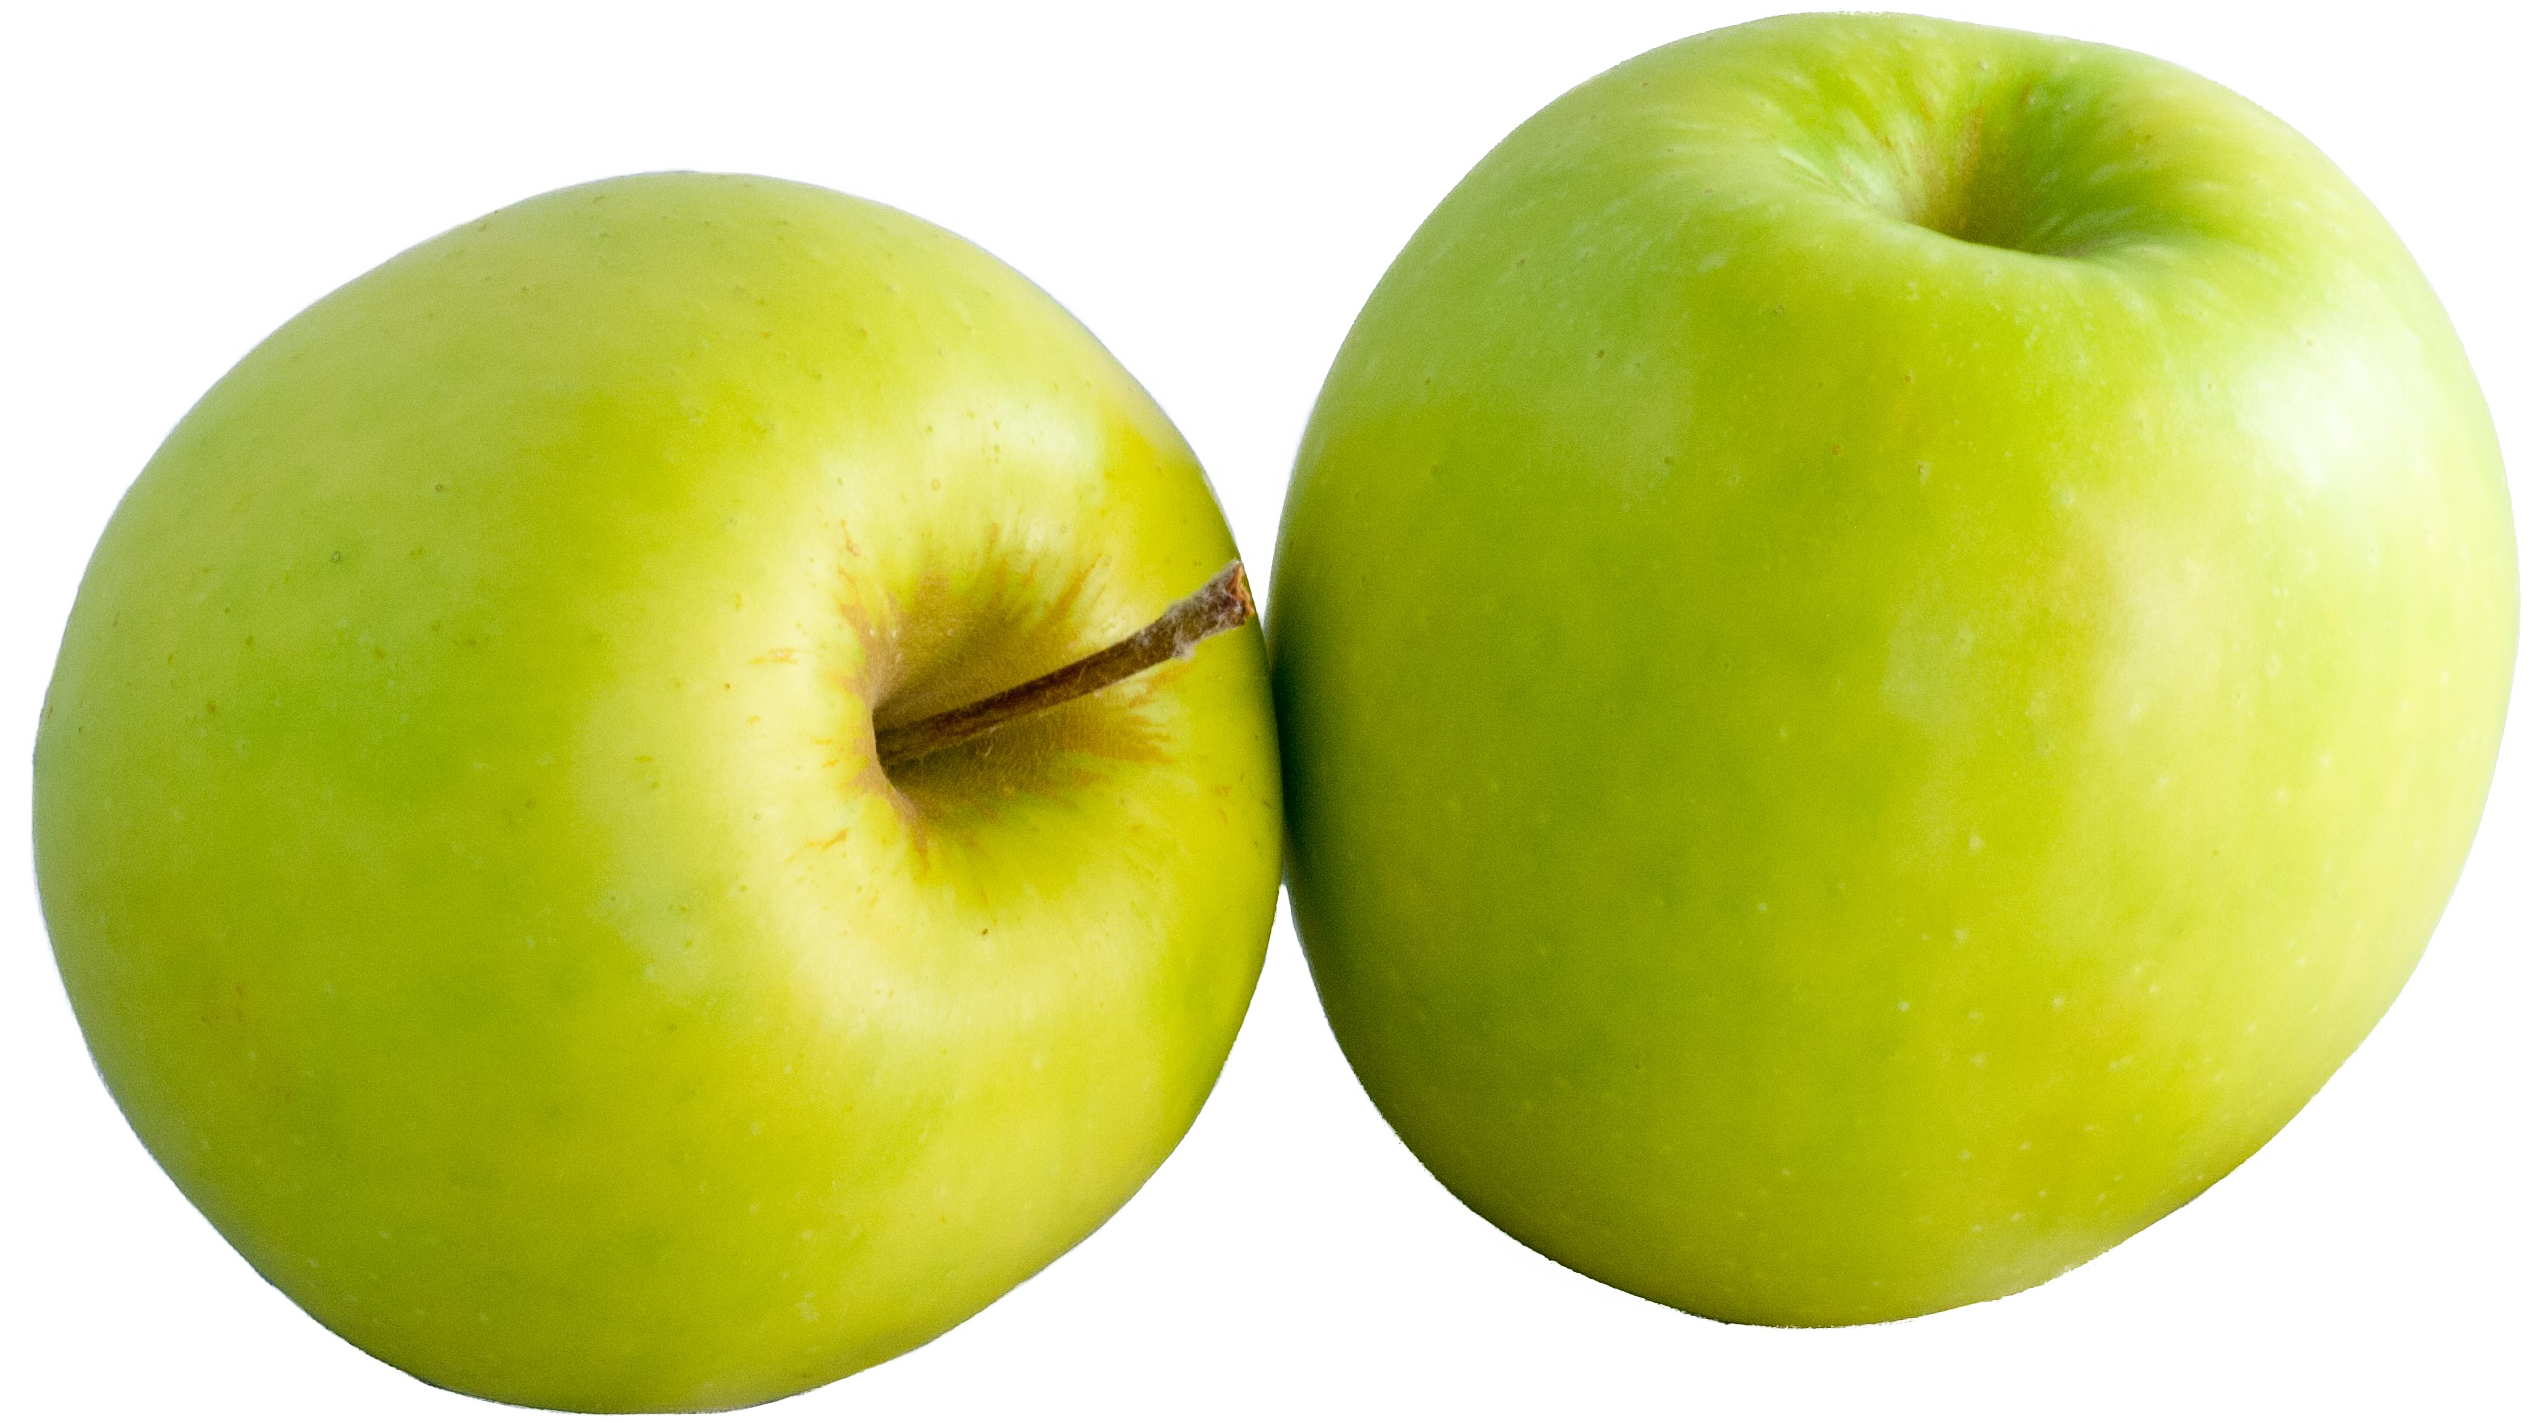 Green Apples PNG Image